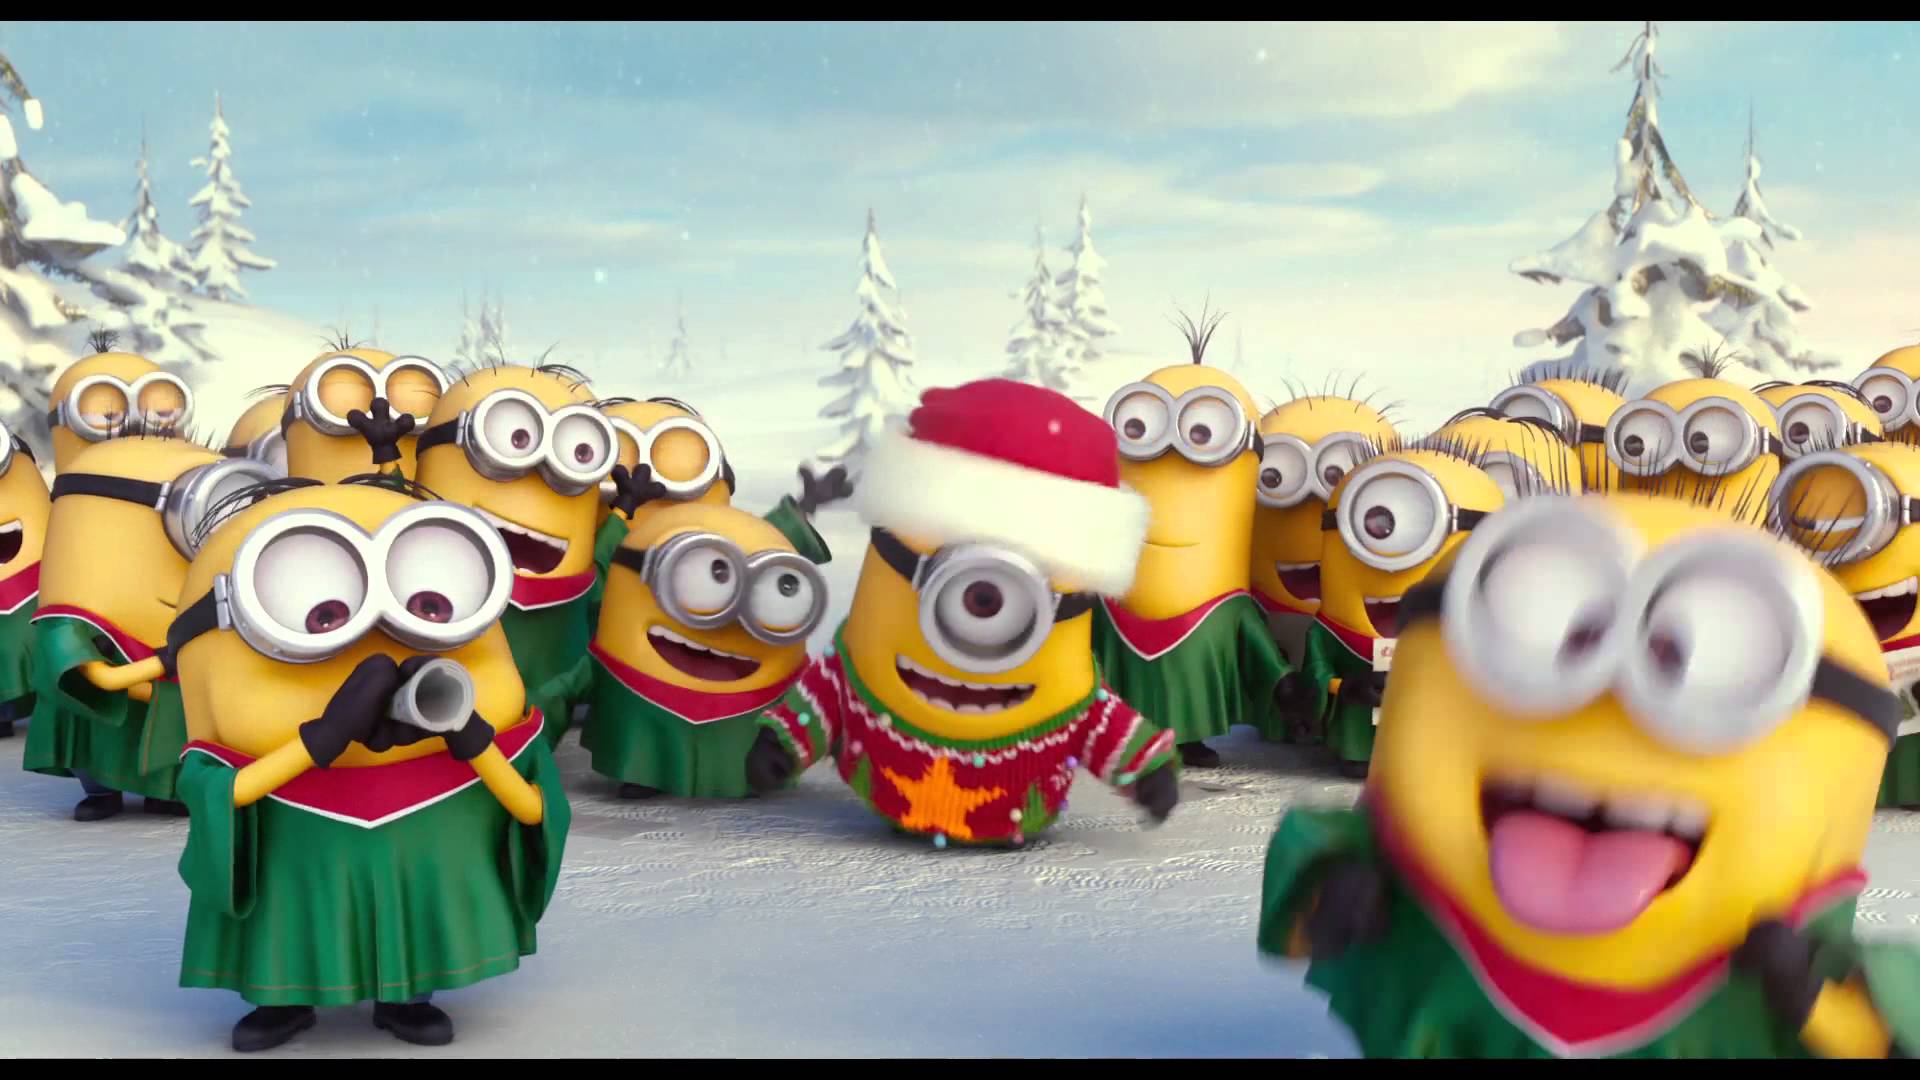 Merry Christmas Minions Wallpapers - Wallpaper Cave